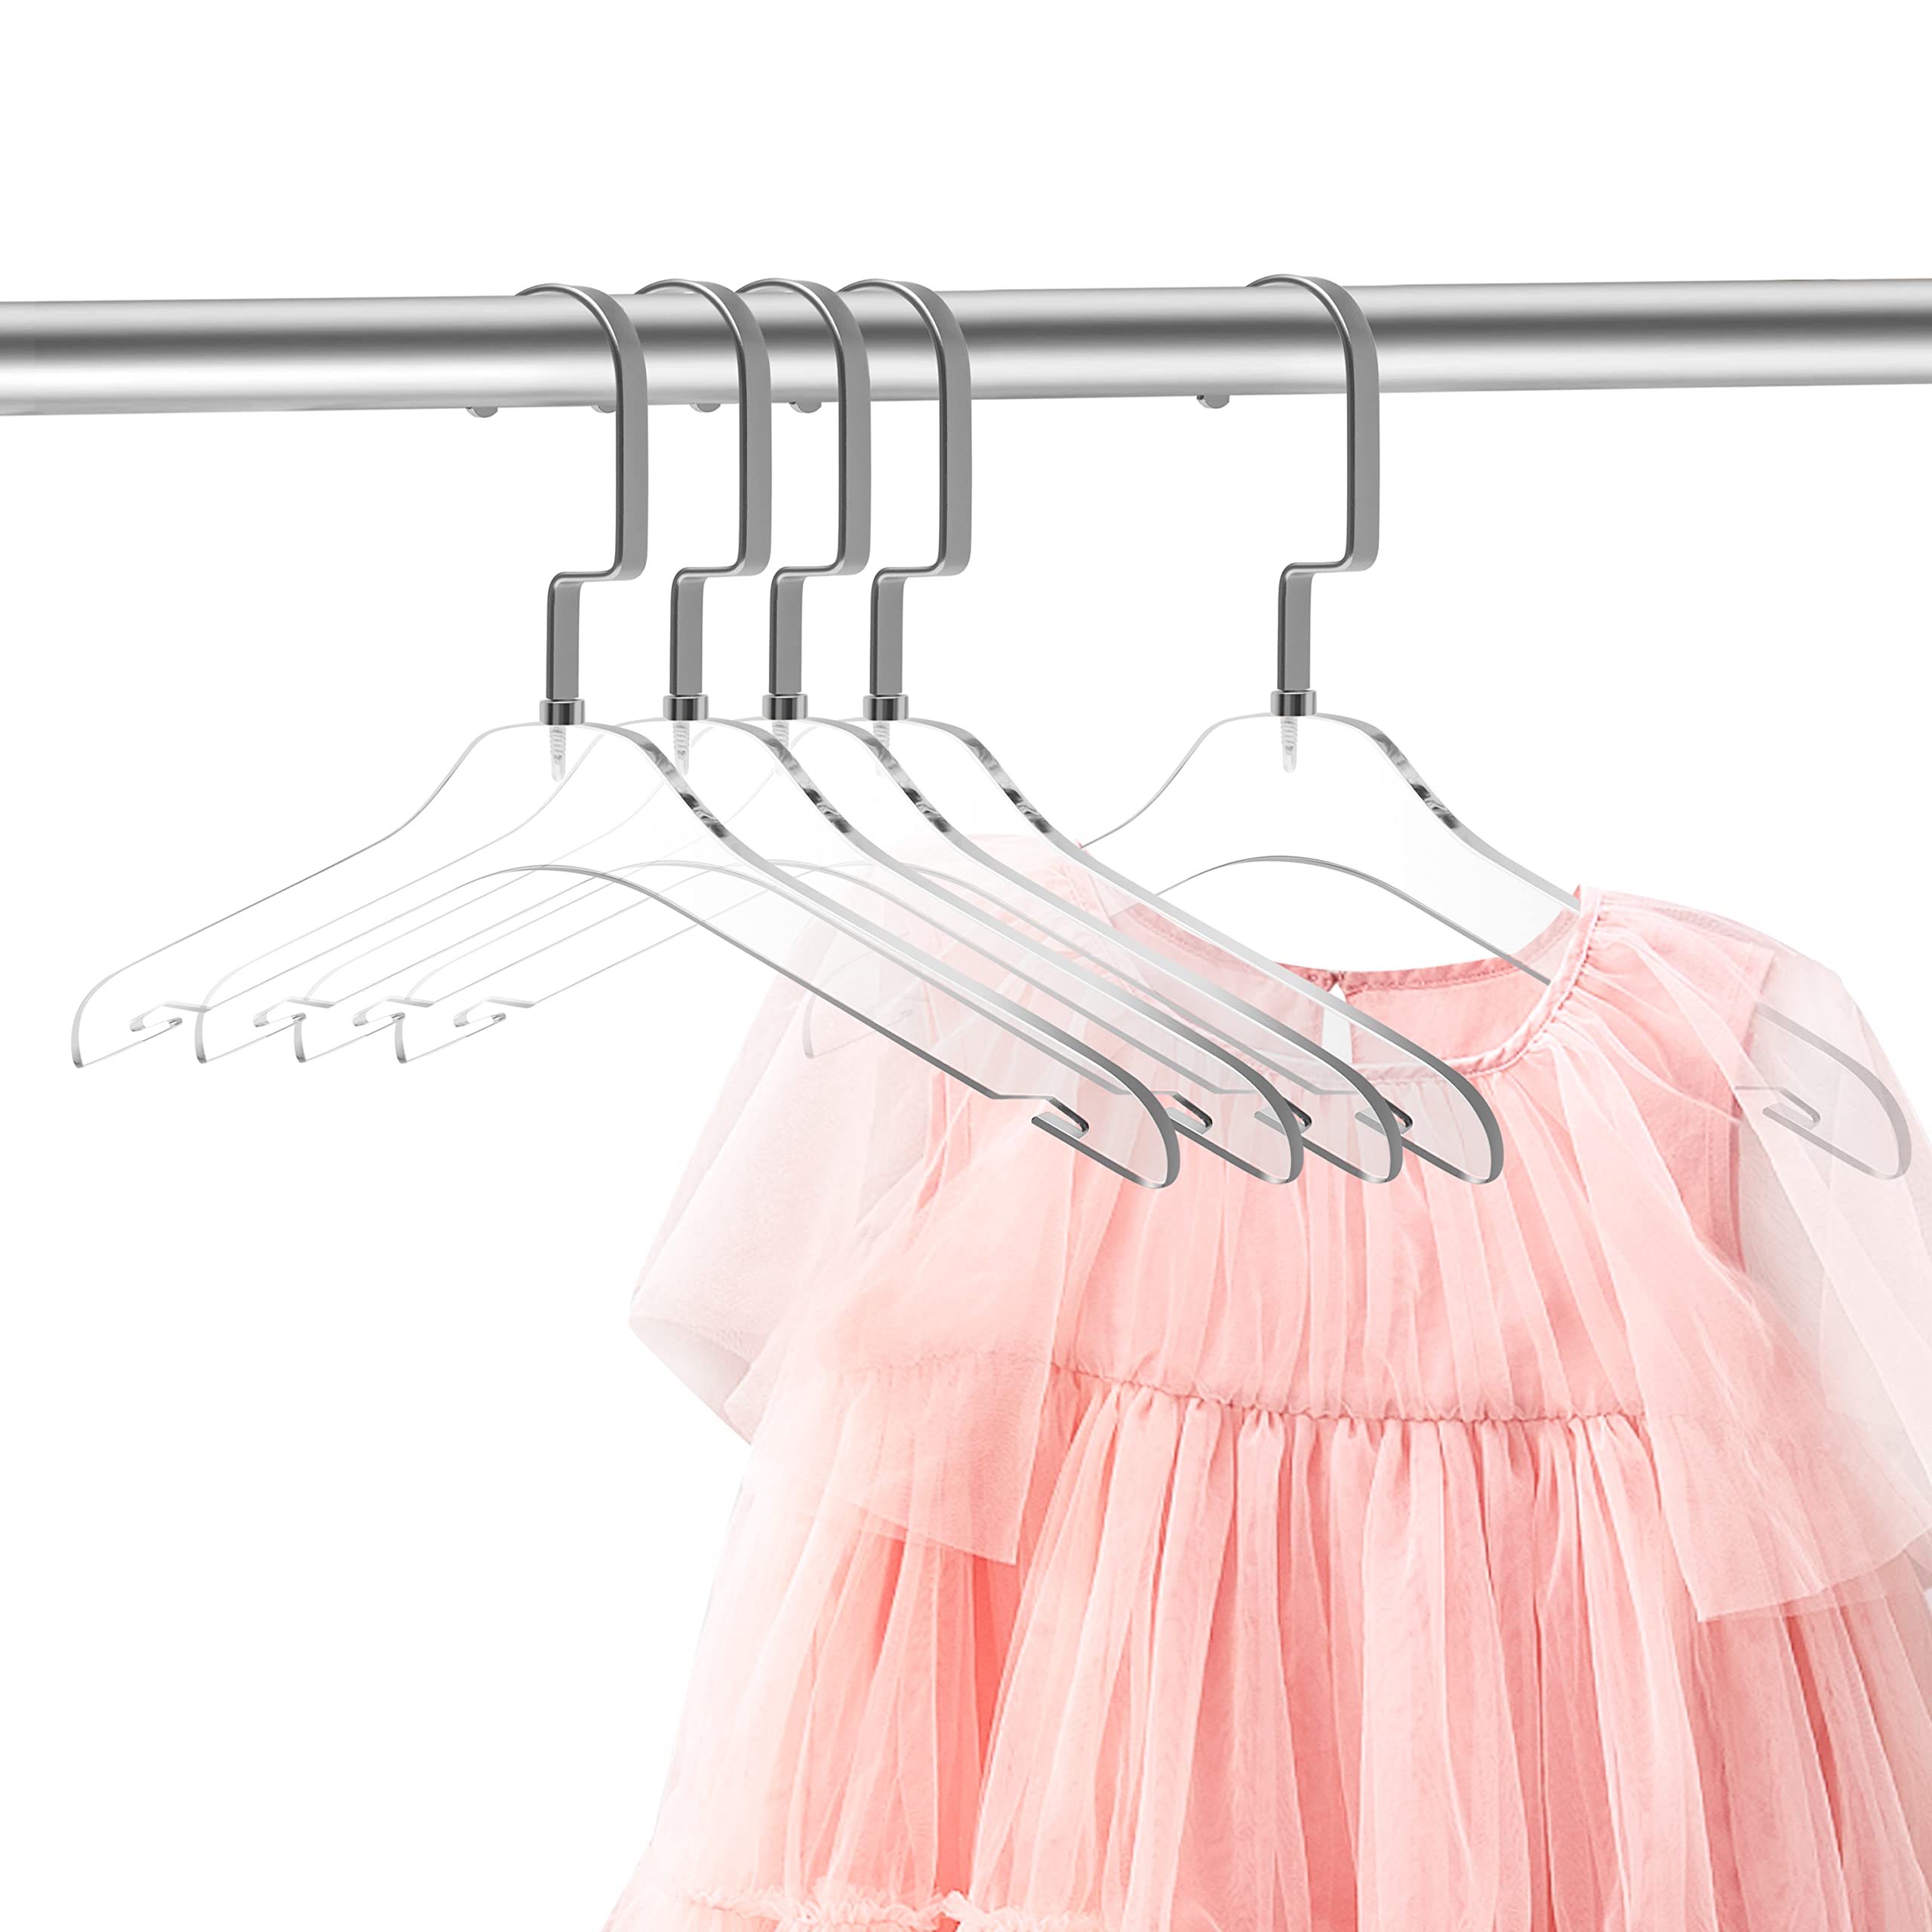 Quality Hangers 5 Pack 12.5 Inches Kids Size Acrylic Hangers � Crystal Clear Hangers for Kids Clothes 7-10 Years Old with Wide Matte Silver Metallic Hook - Acrylic Children Shirt Suit Coat Hanger  - Very Good